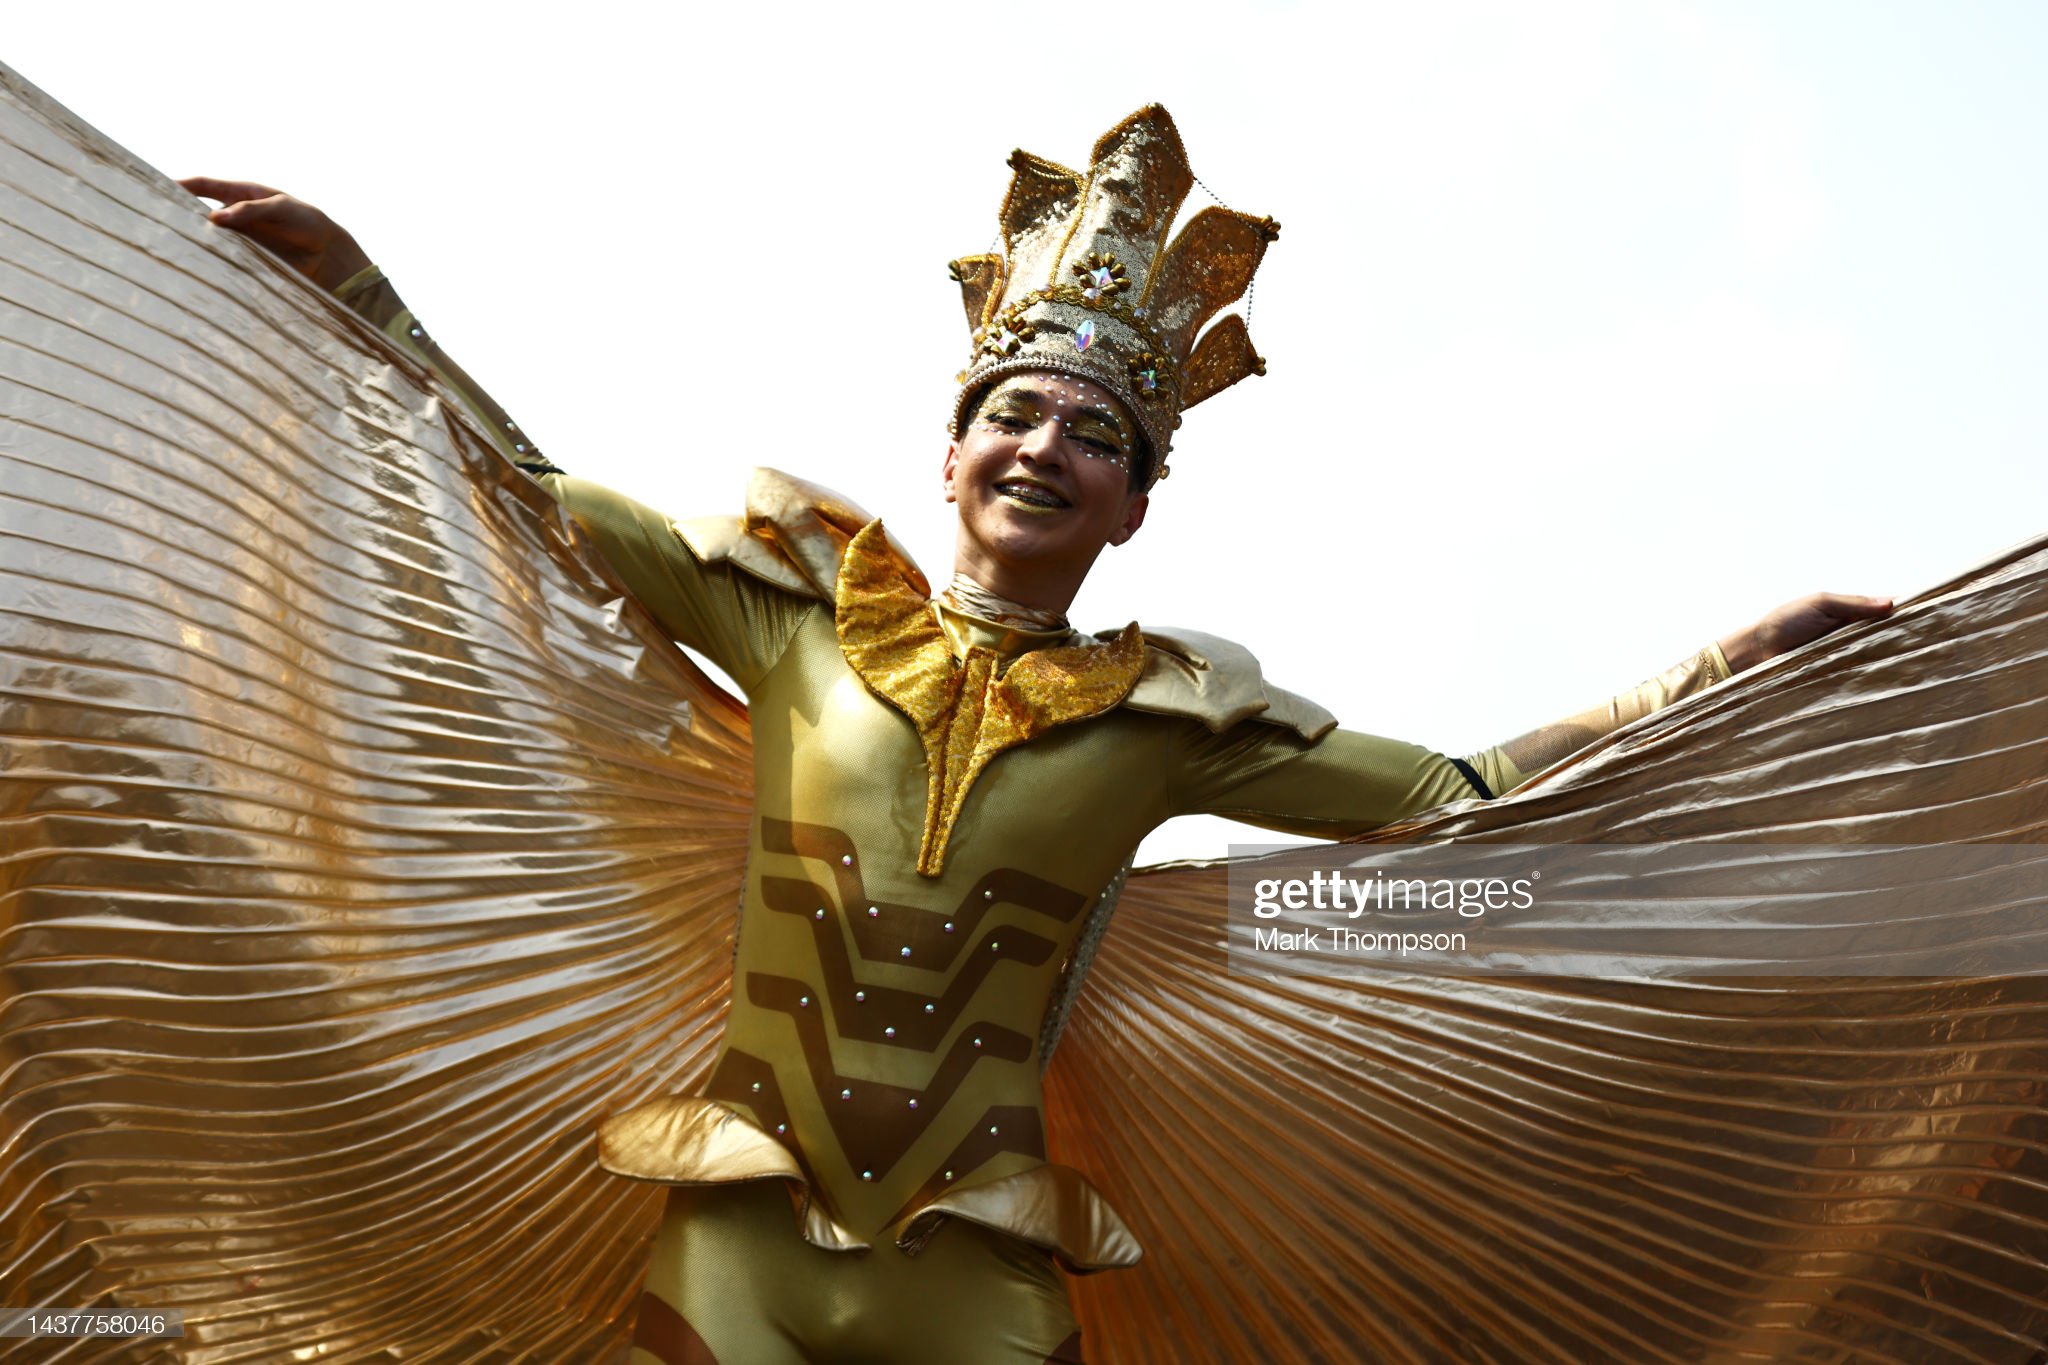 A performer entertains the crowd on the grid during the F1 Grand Prix of Mexico.